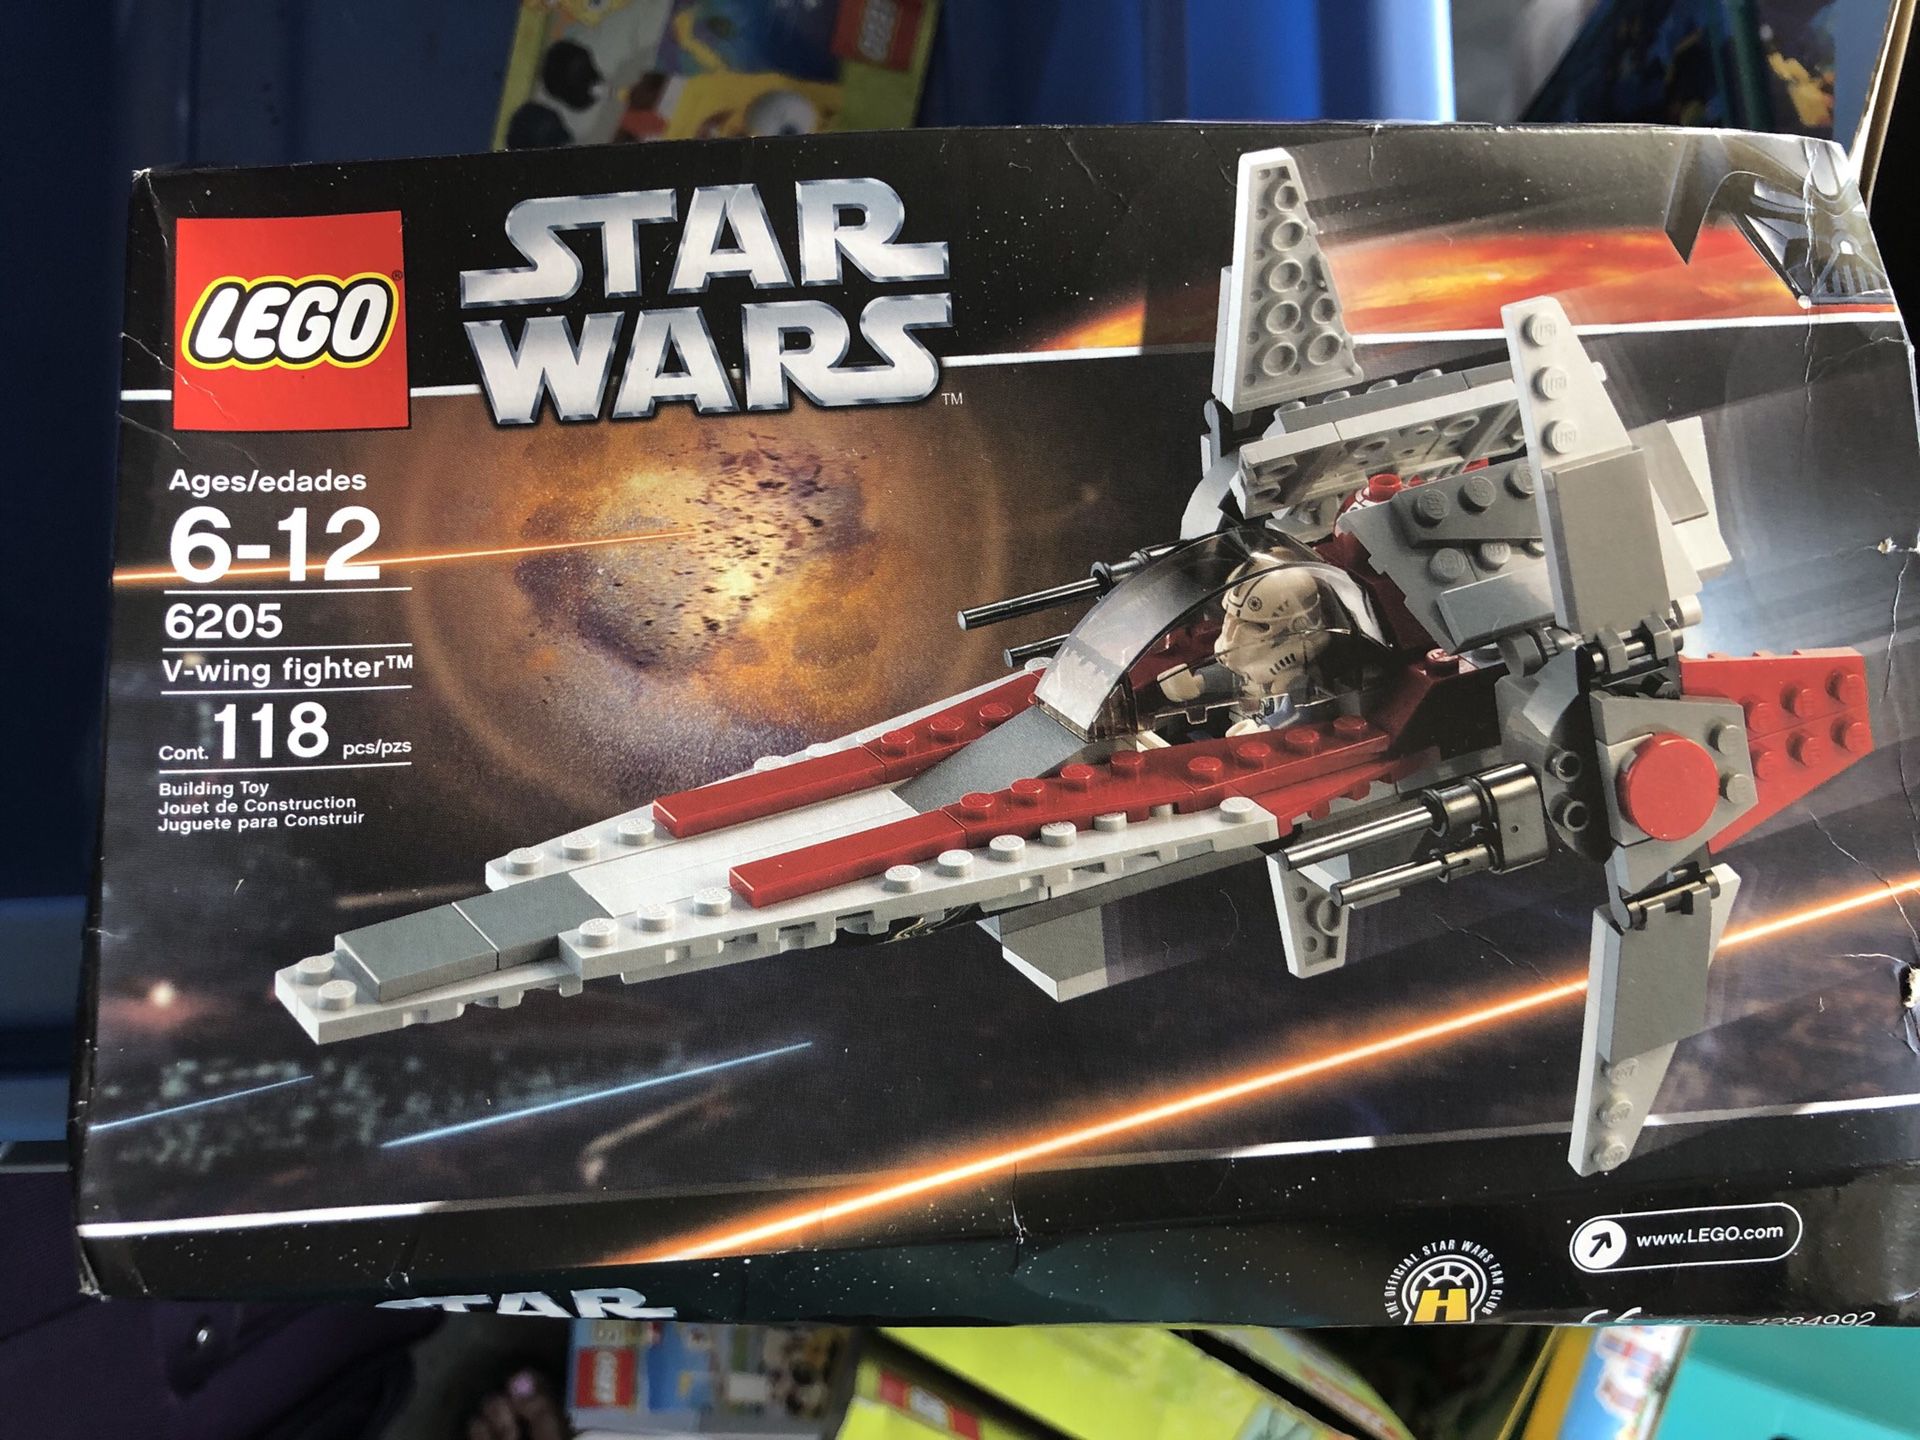 Star Wars LEGO 6205 for Sale Buena Park, CA - OfferUp